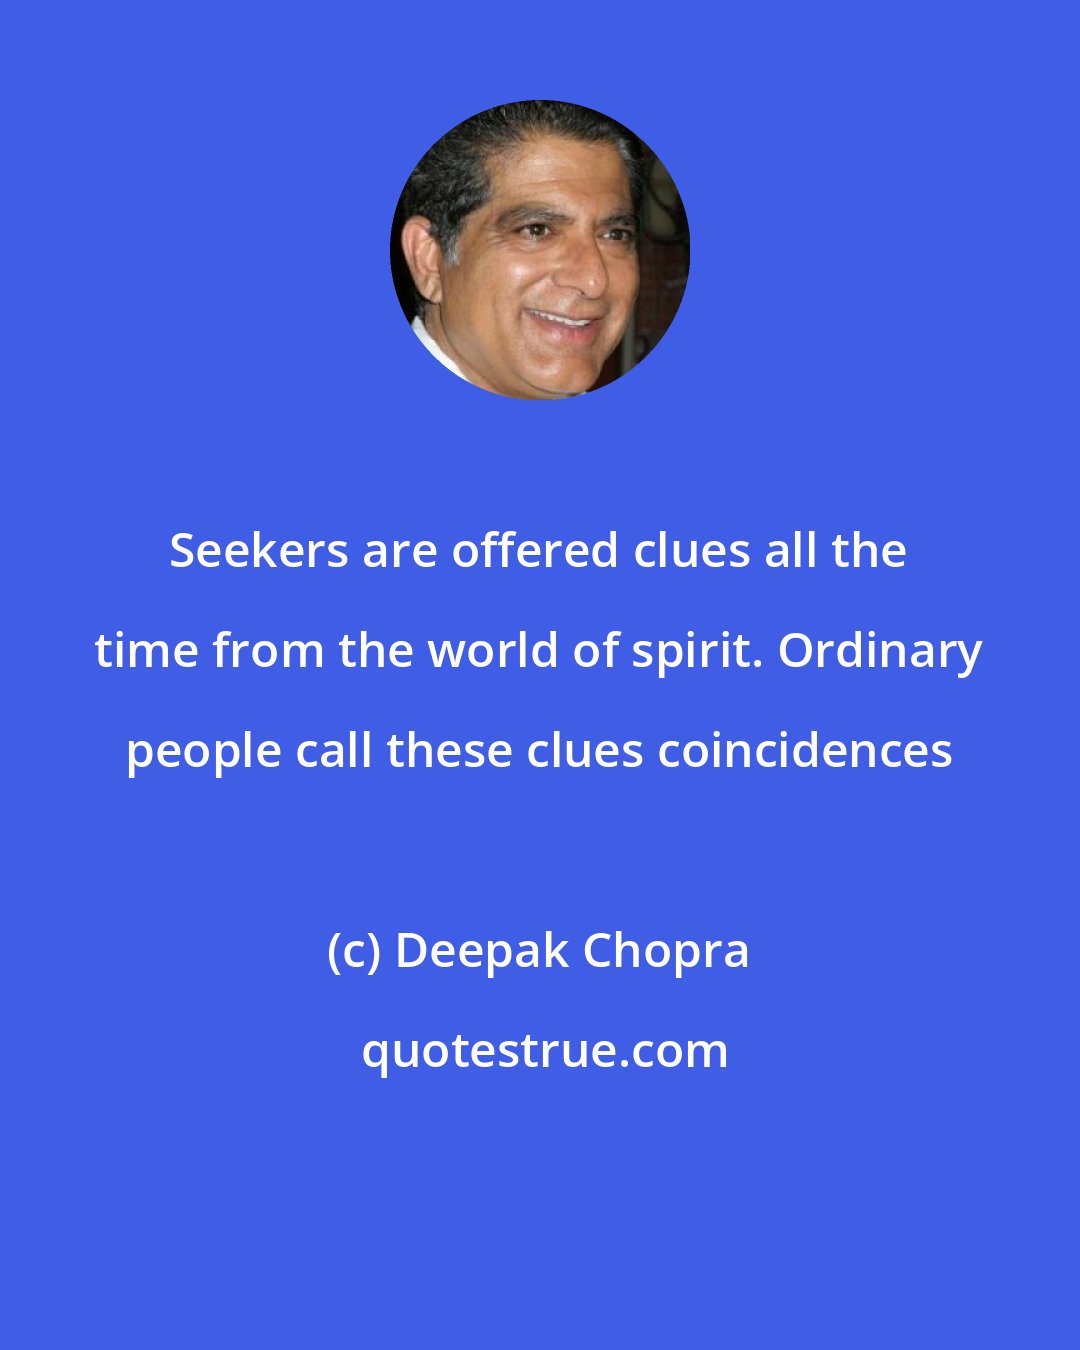 Deepak Chopra: Seekers are offered clues all the time from the world of spirit. Ordinary people call these clues coincidences